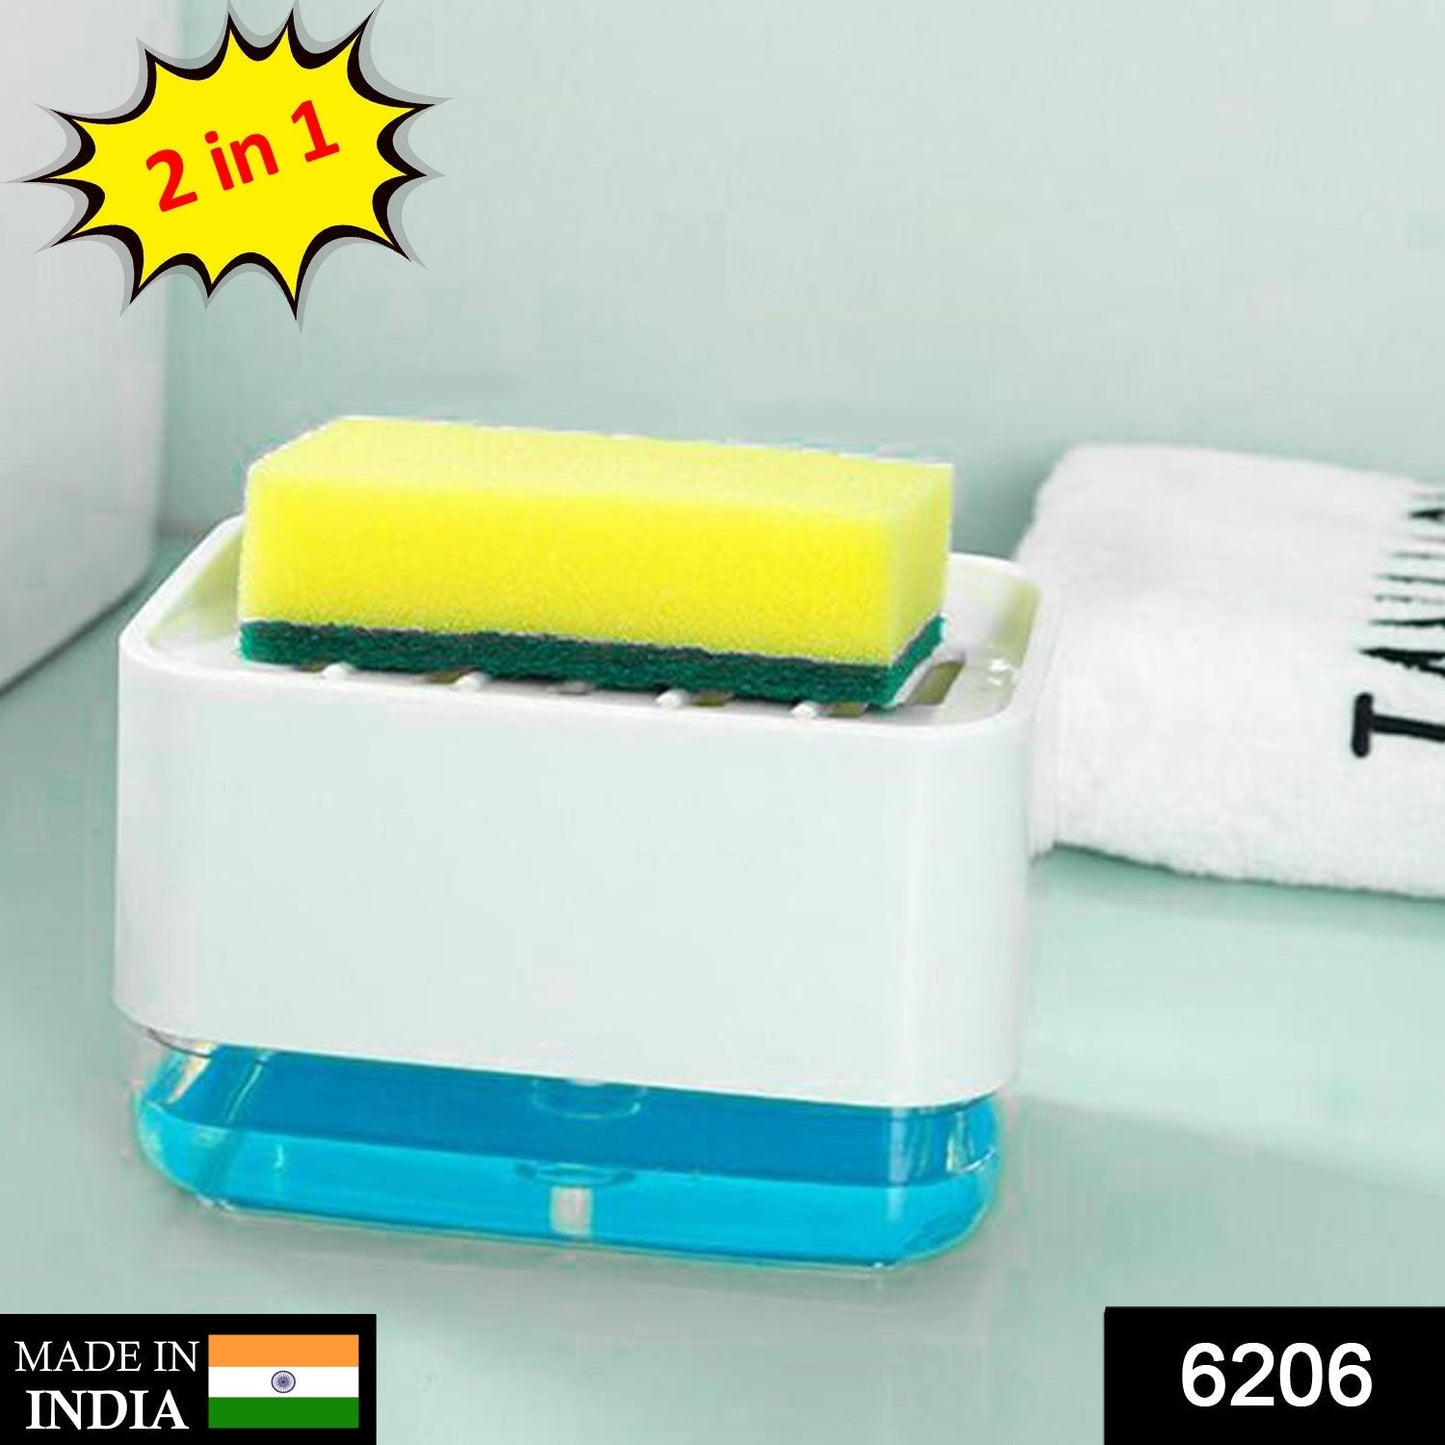 6206 2 in 1 Soap Dispenser Used As A Soap Holder In Bathrooms And Toilets. DeoDap